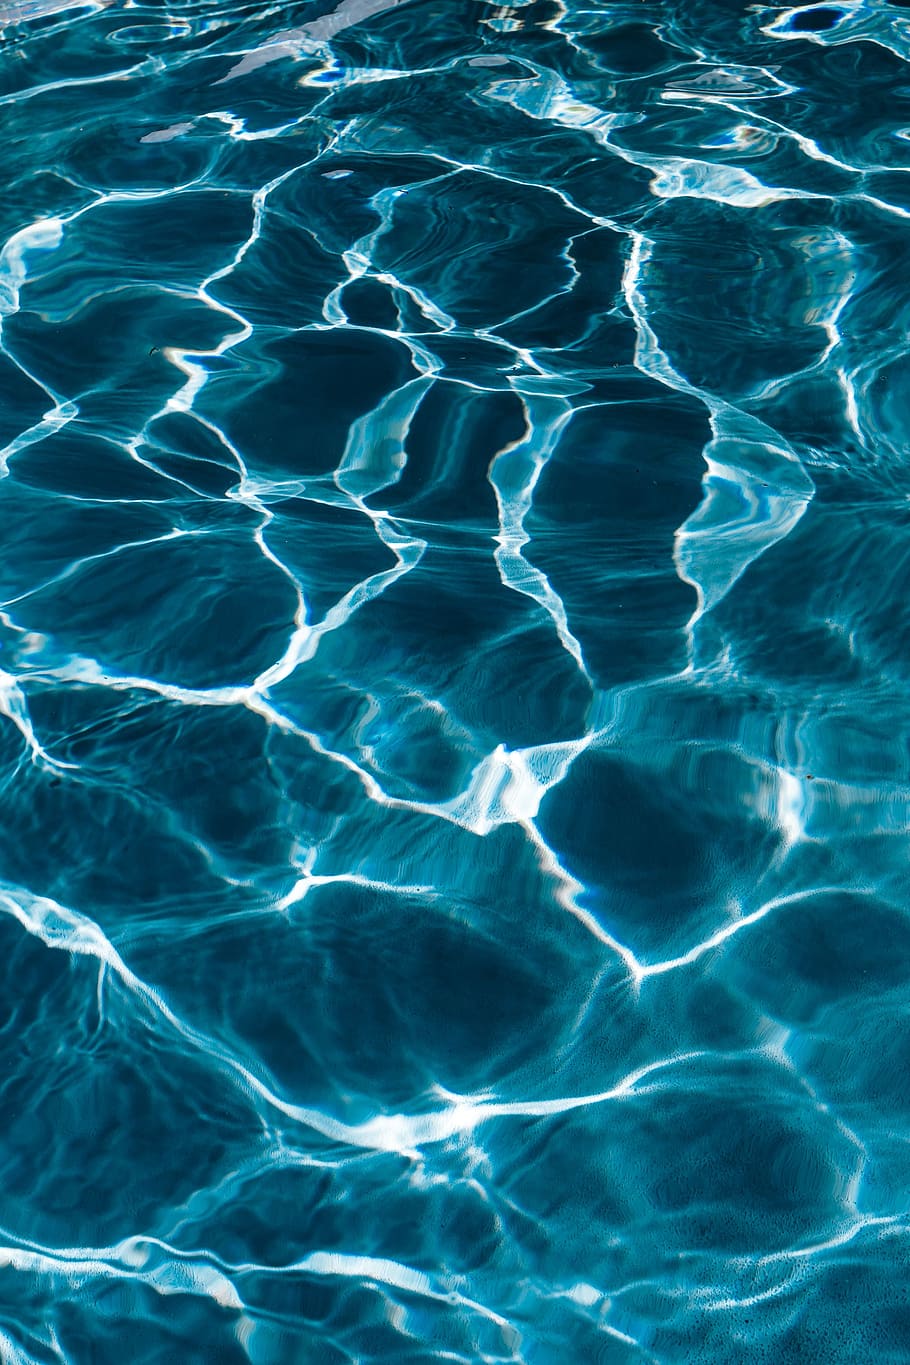 HD wallpaper: Wavy water surface in a swimming pool, wave, abstract, background